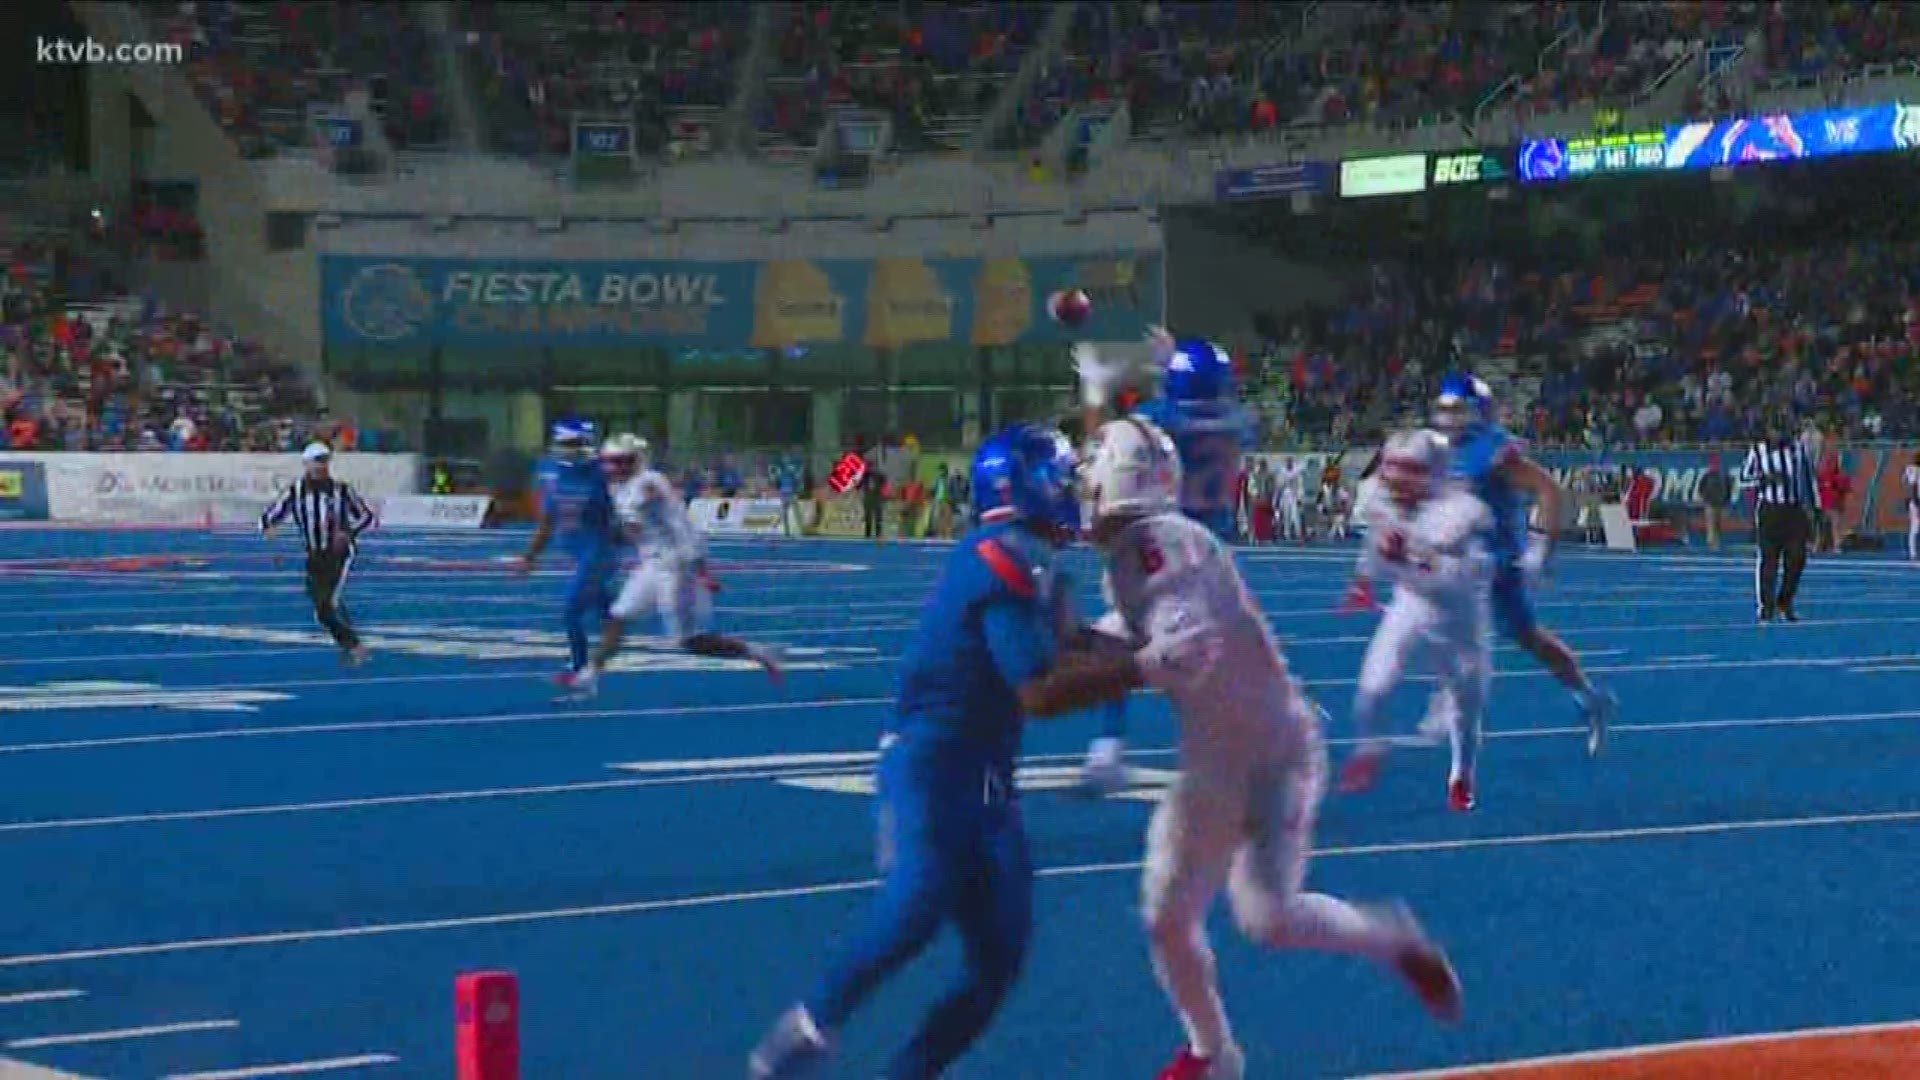 The deal will have an impact on kick-off times for Boise State football games.